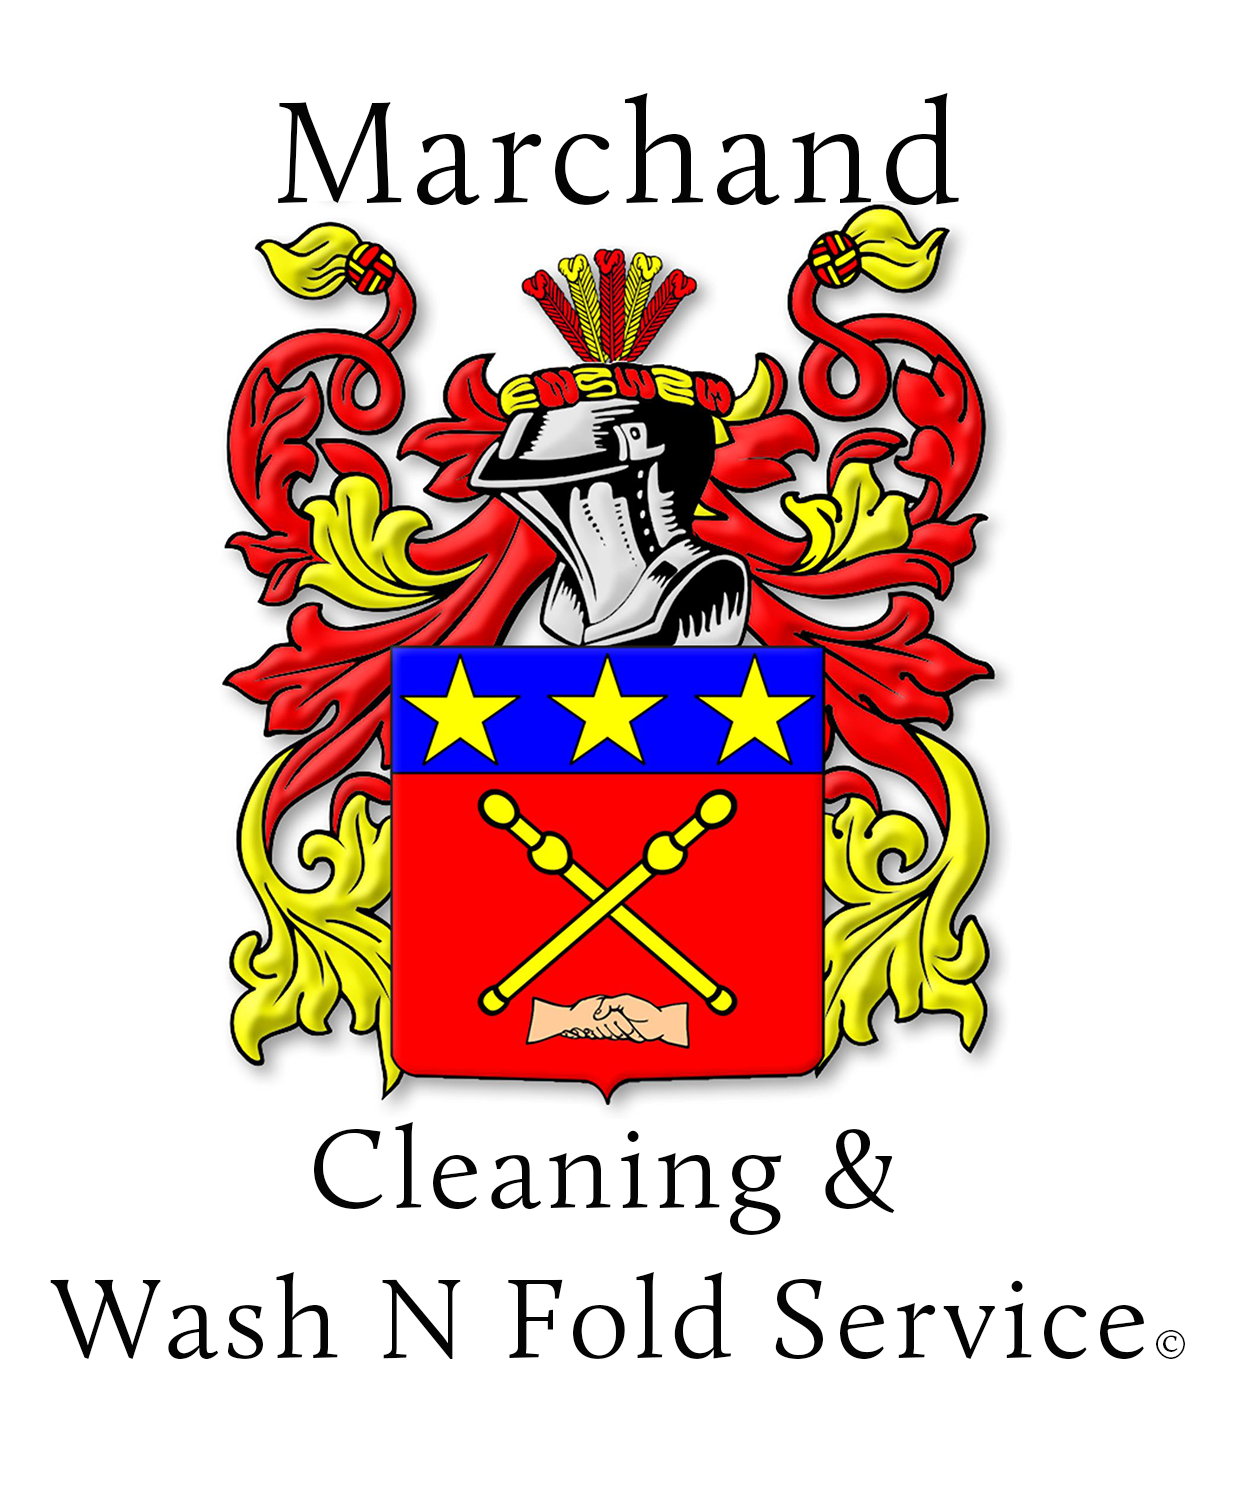 MarchandCleaningLogo